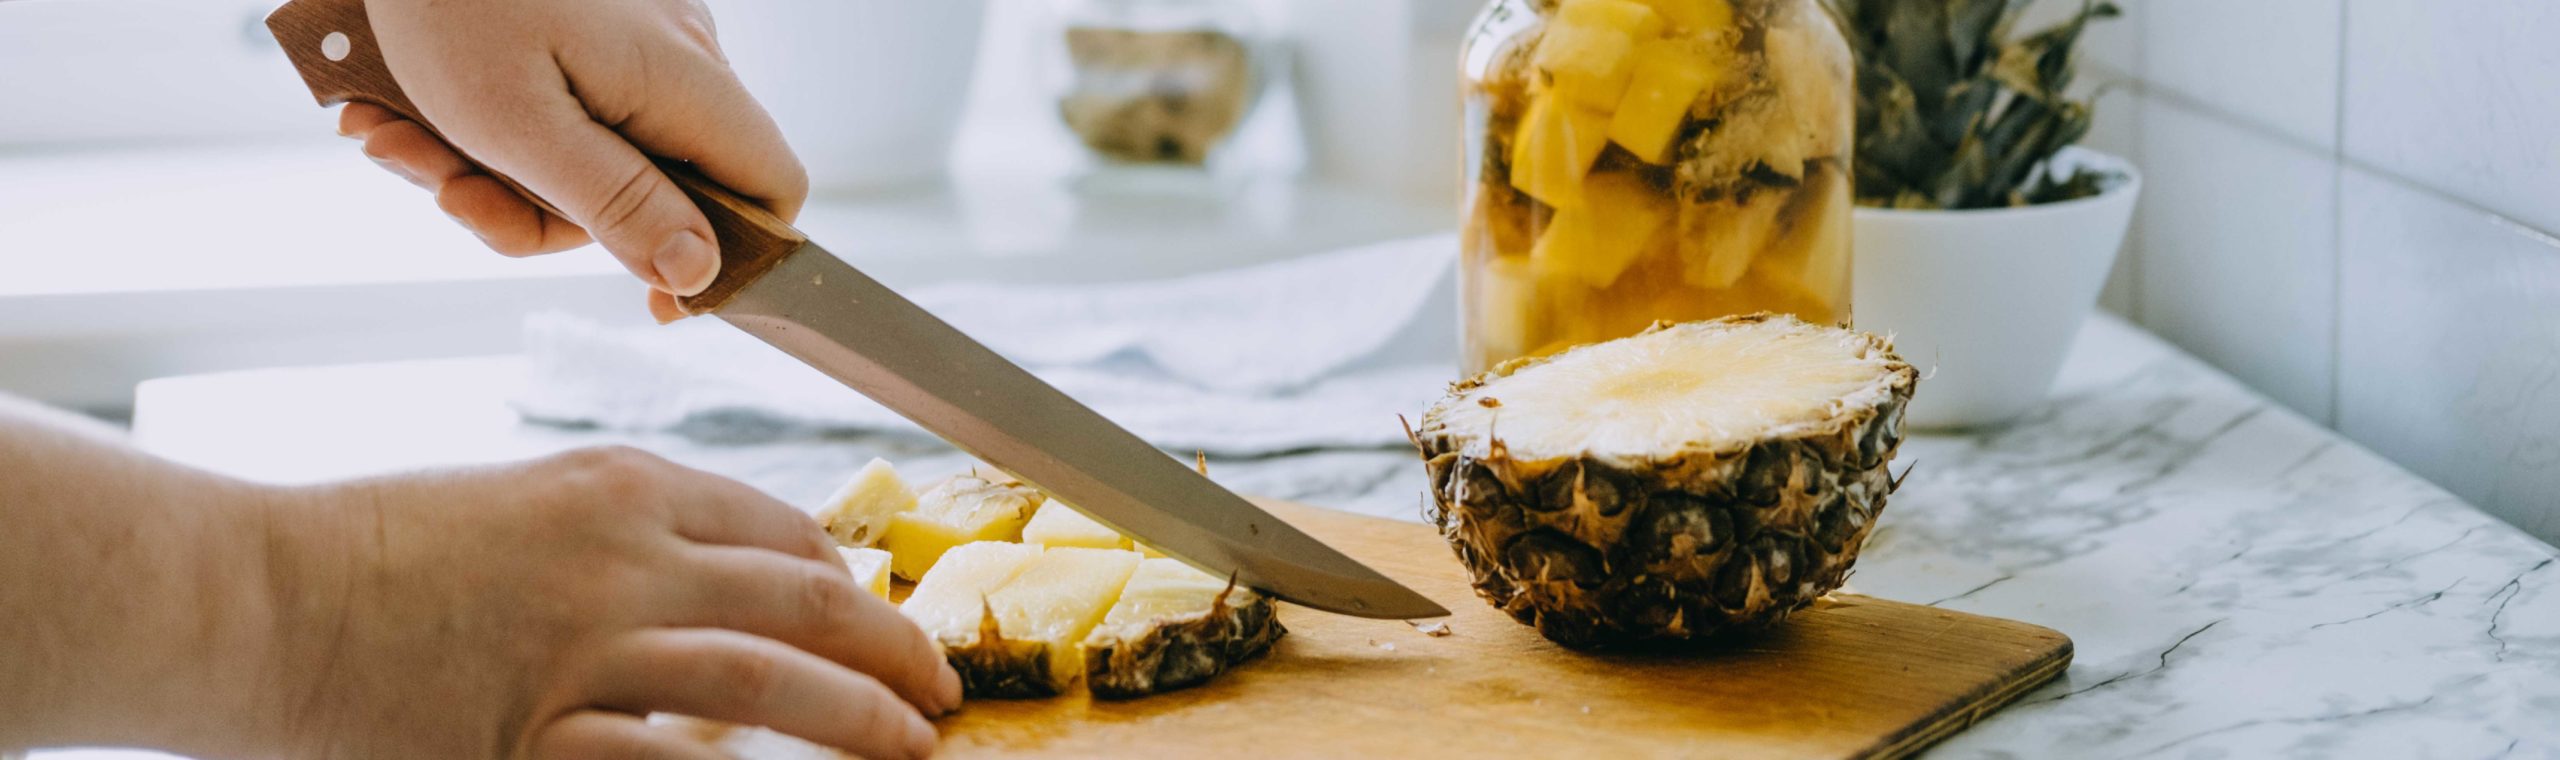 Is Pineapple Good for Digestion?